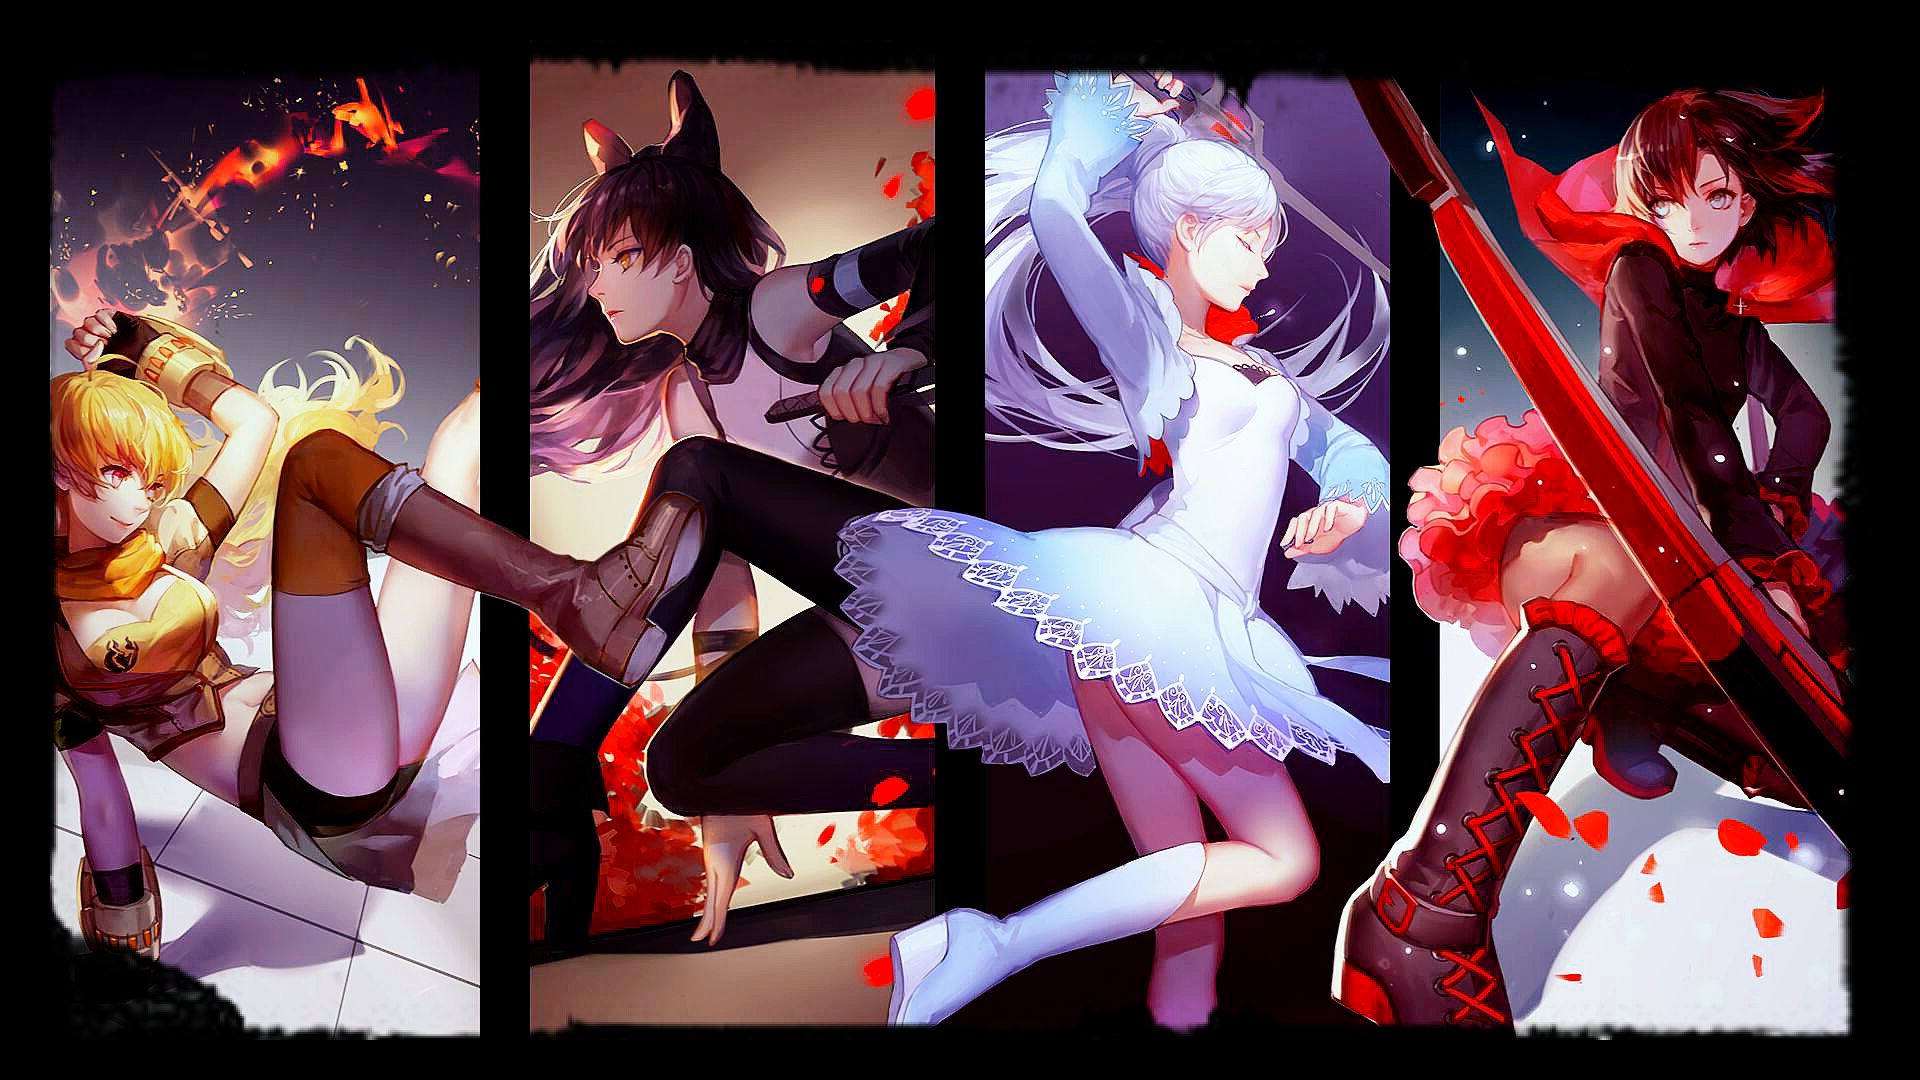 RWBY, Ruby Rose, Weiss Schnee, Blake Belladonna, Yang Xiao Long, Rooster Teeth, Red, White, Black, Yellow, White Dress, Dress, Anime Wallpaper HD / Desktop and Mobile Background